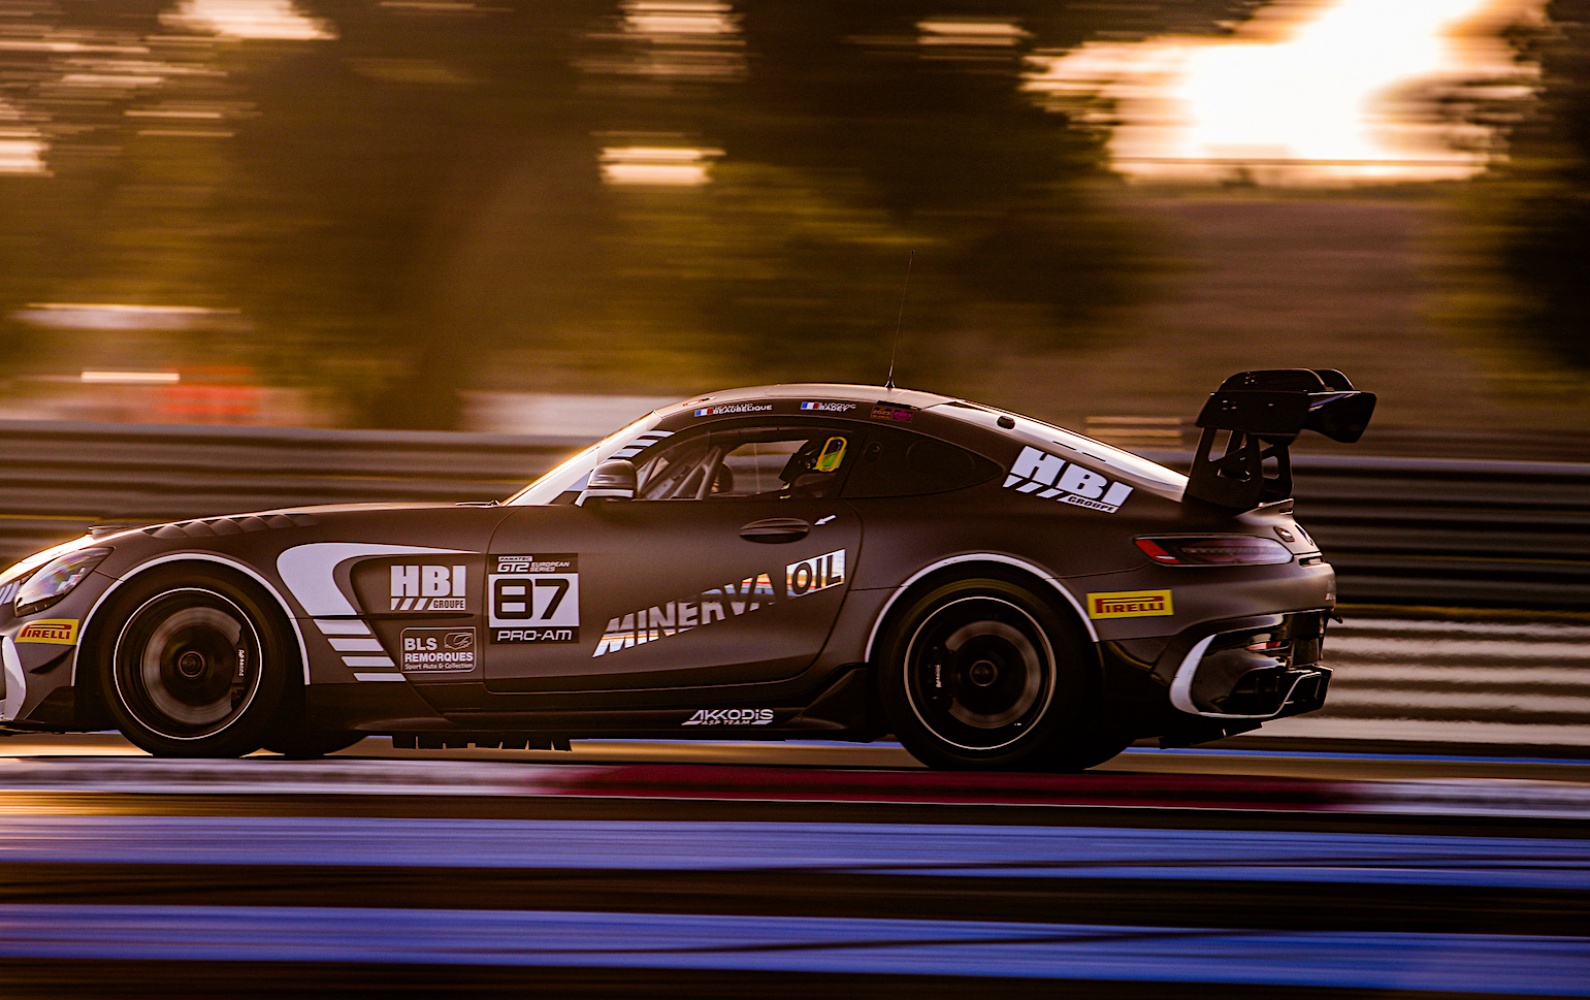 Fanatec GT2 European Series - Paul Ricard (France) - Victory and a podium to close the season!